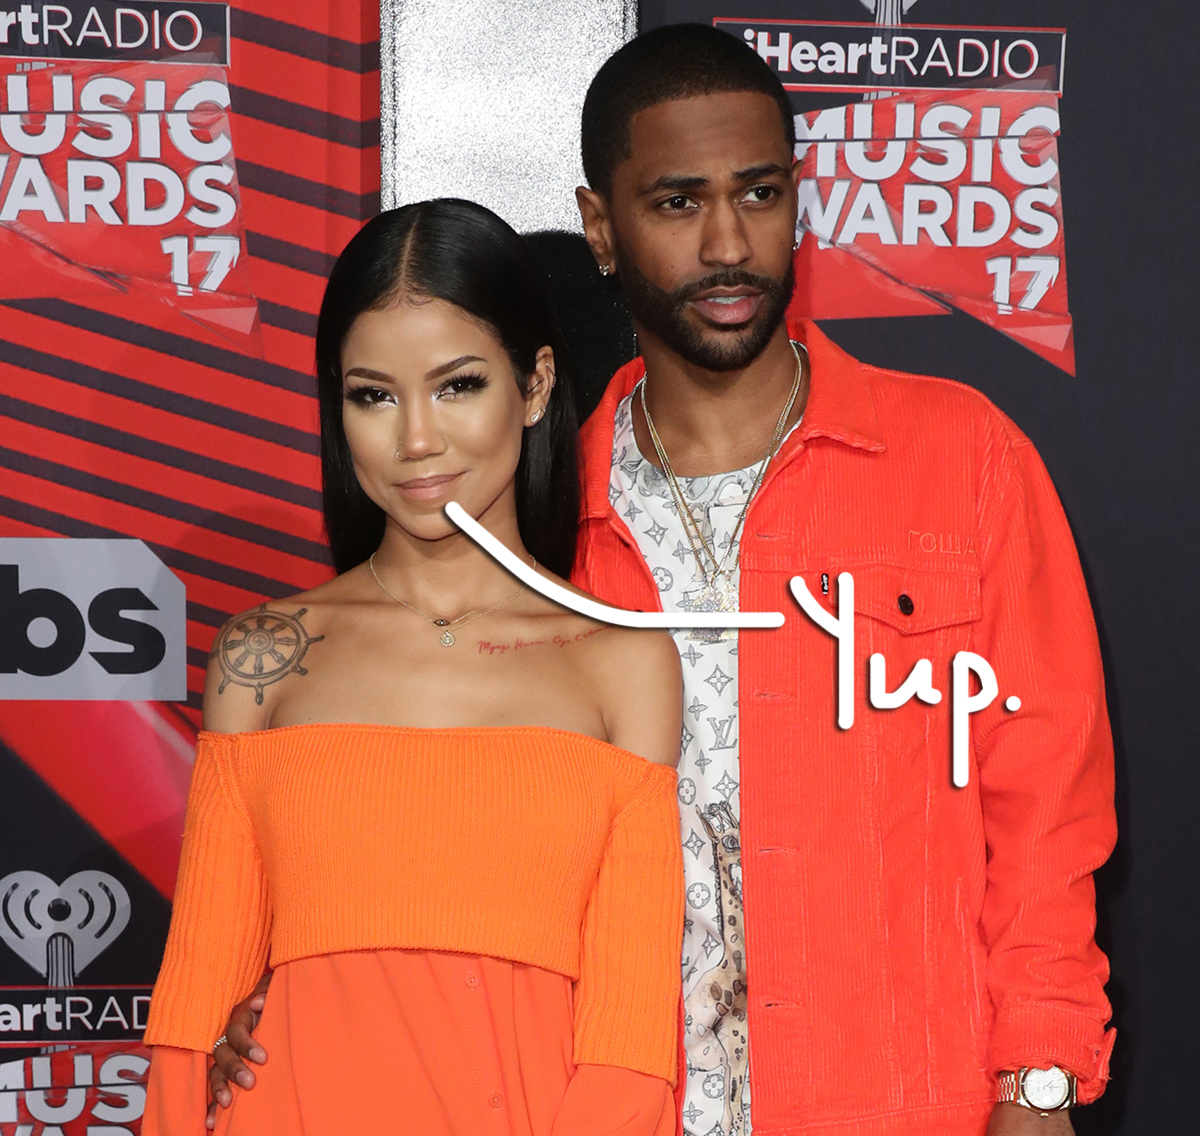 Big Sean Raps About Making Ex Jhené Aiko Climax 9 Times In One Day In